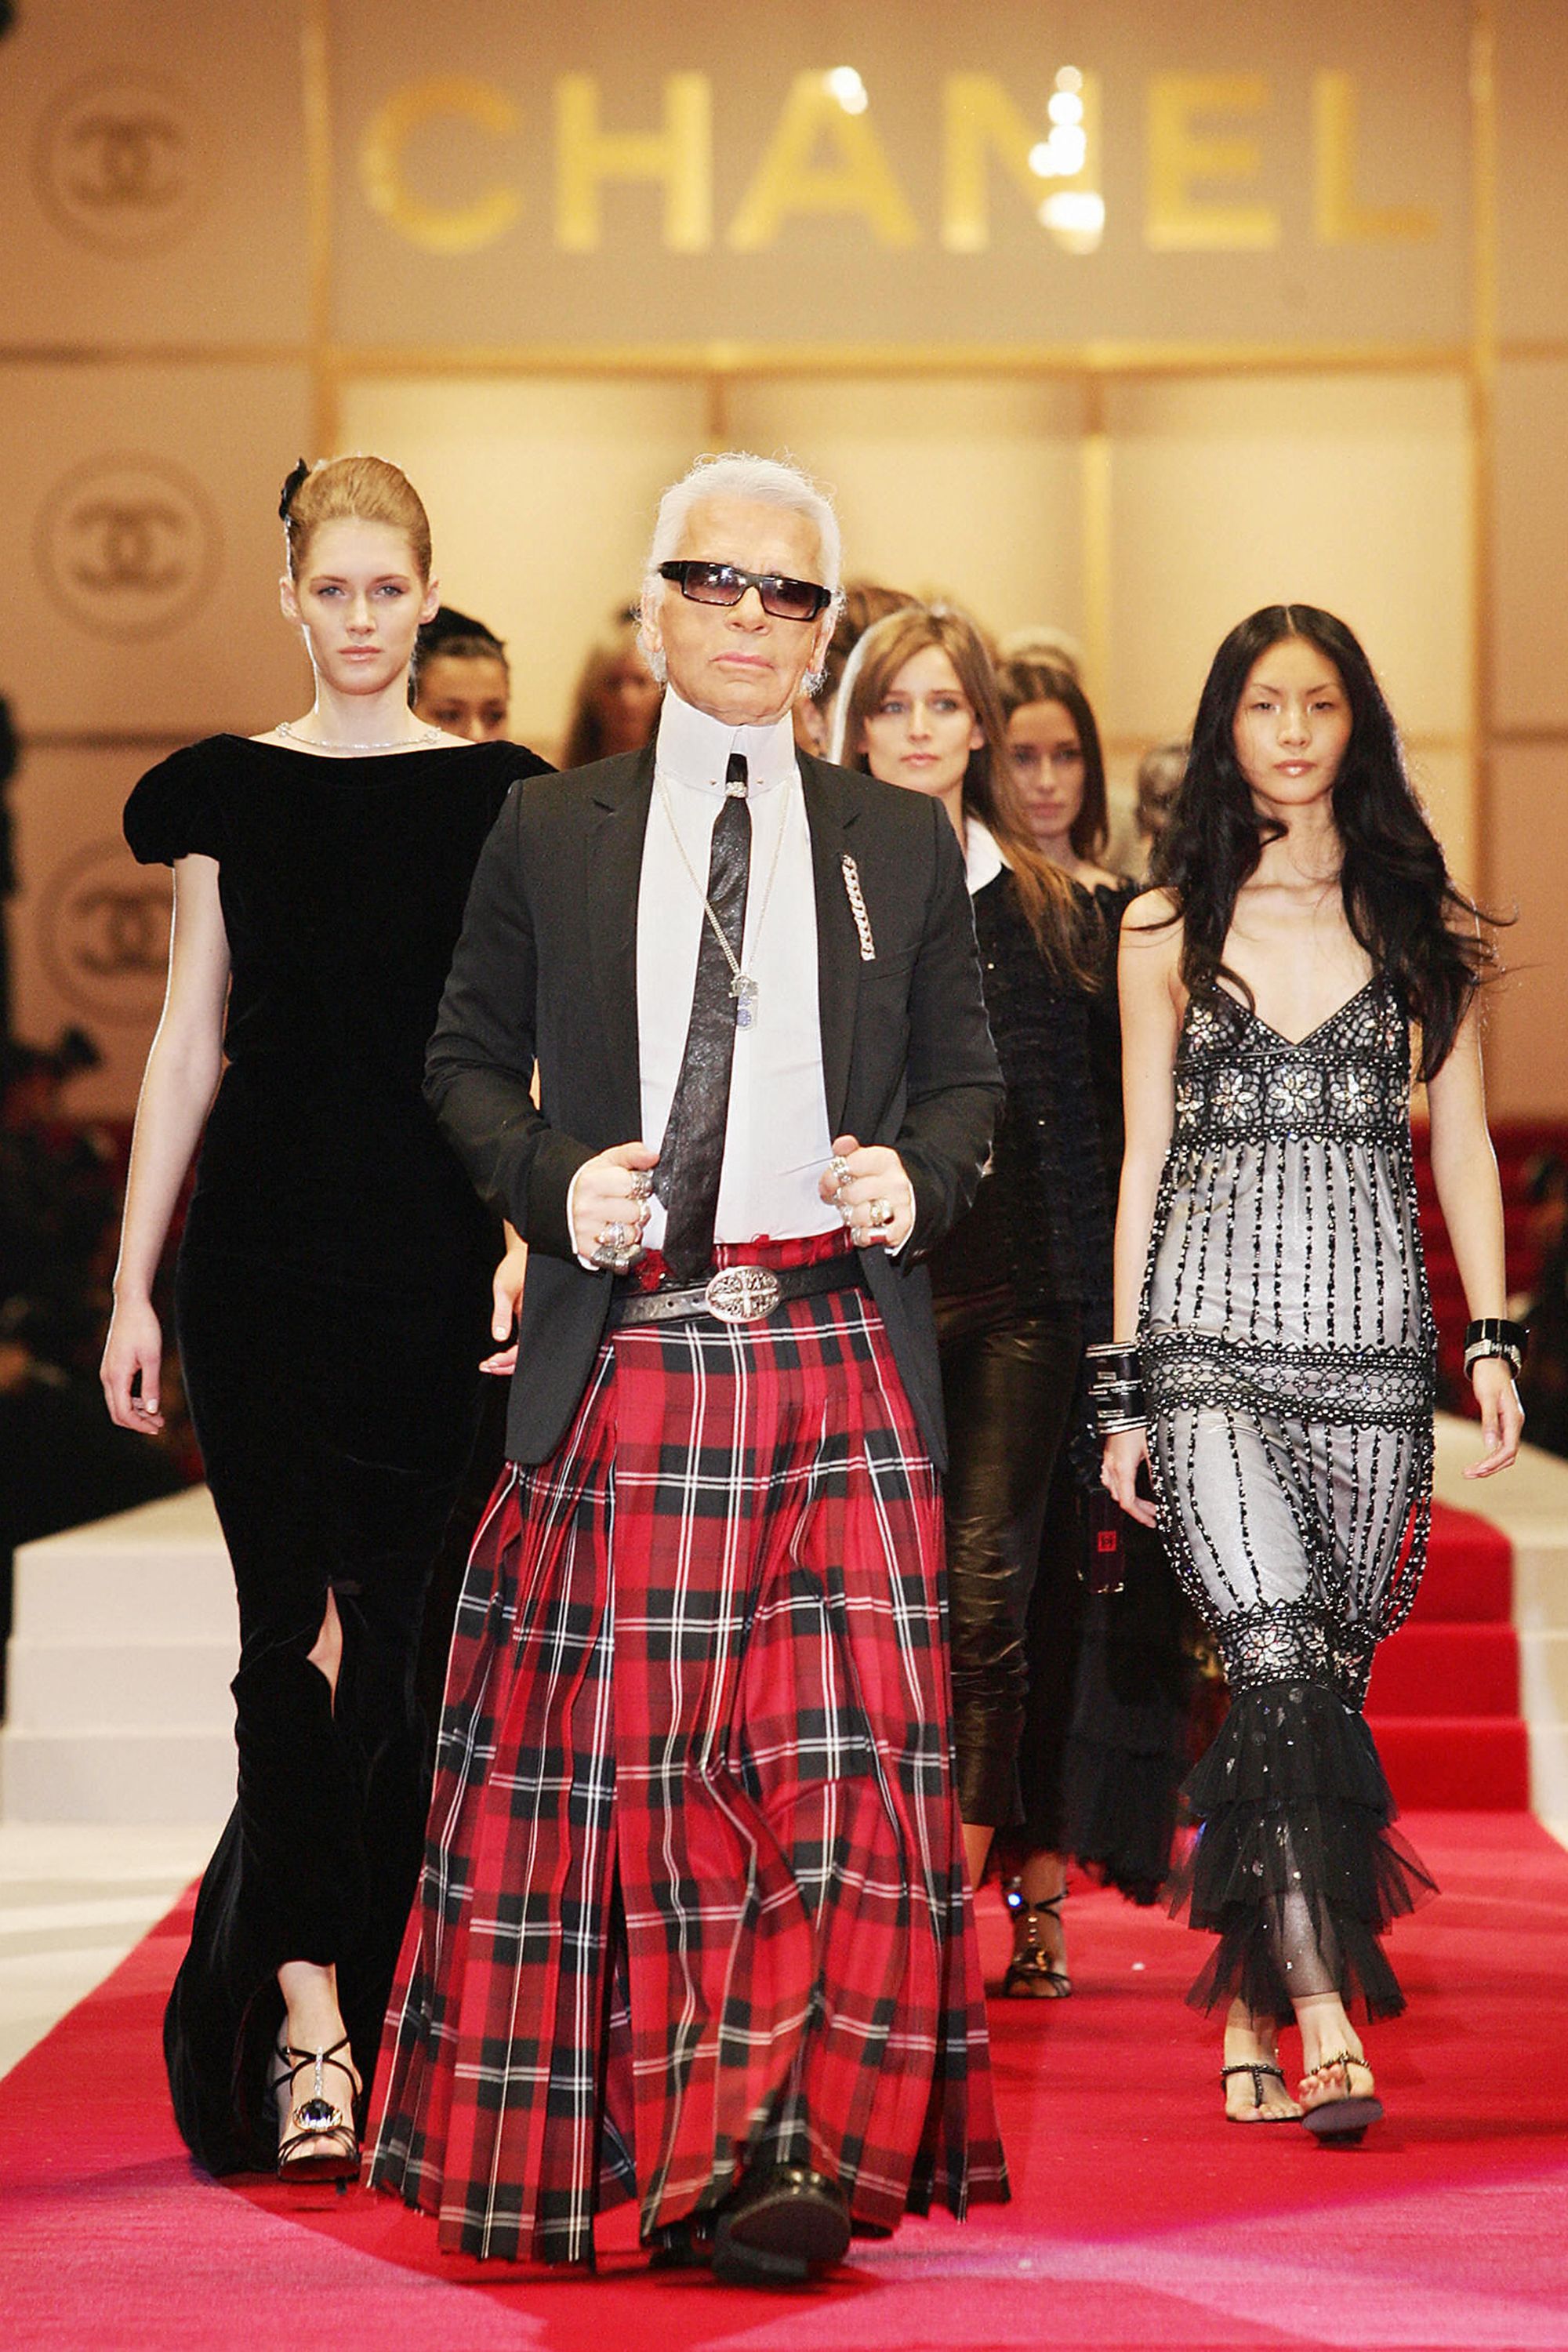 15 of Karl Lagerfeld's best quotes